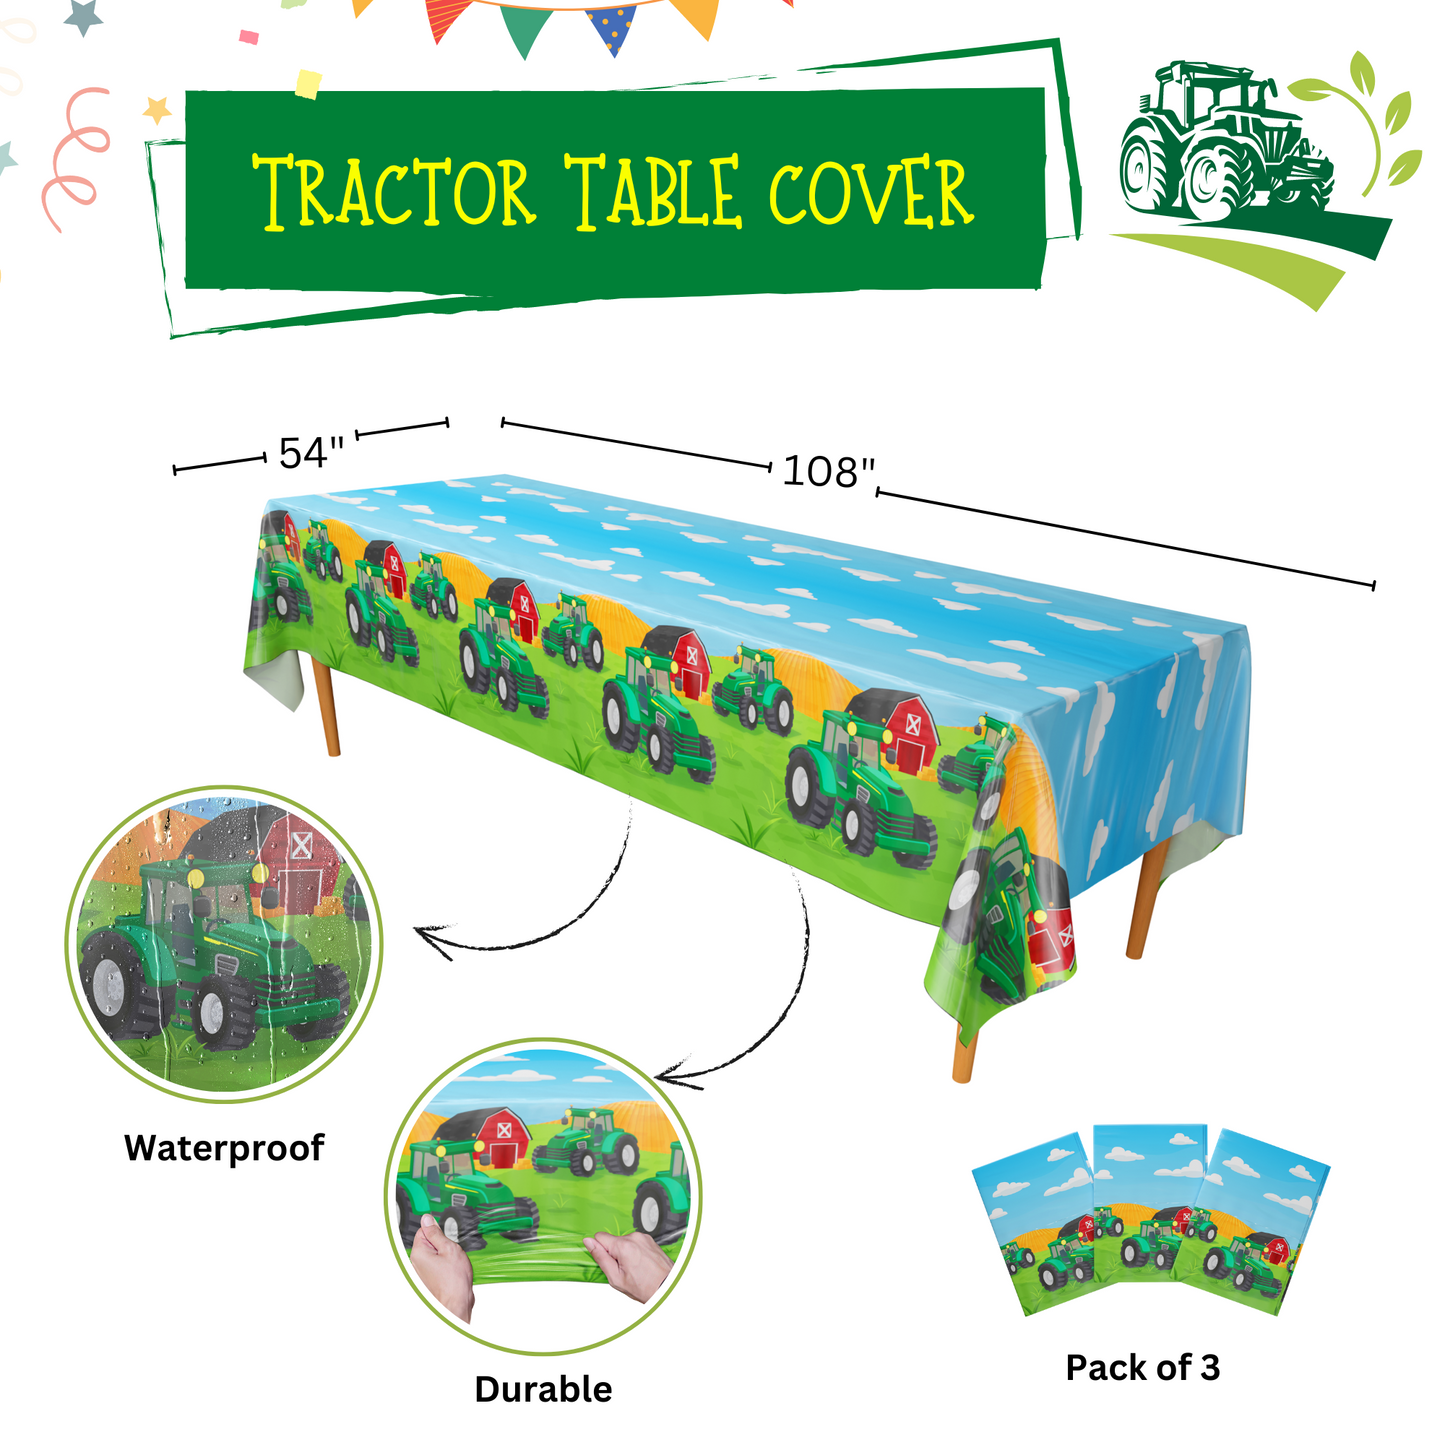 Three pack of Tractor Party Table Covers, each measuring 54 inches by 108 inches, designed to fit XL tables.